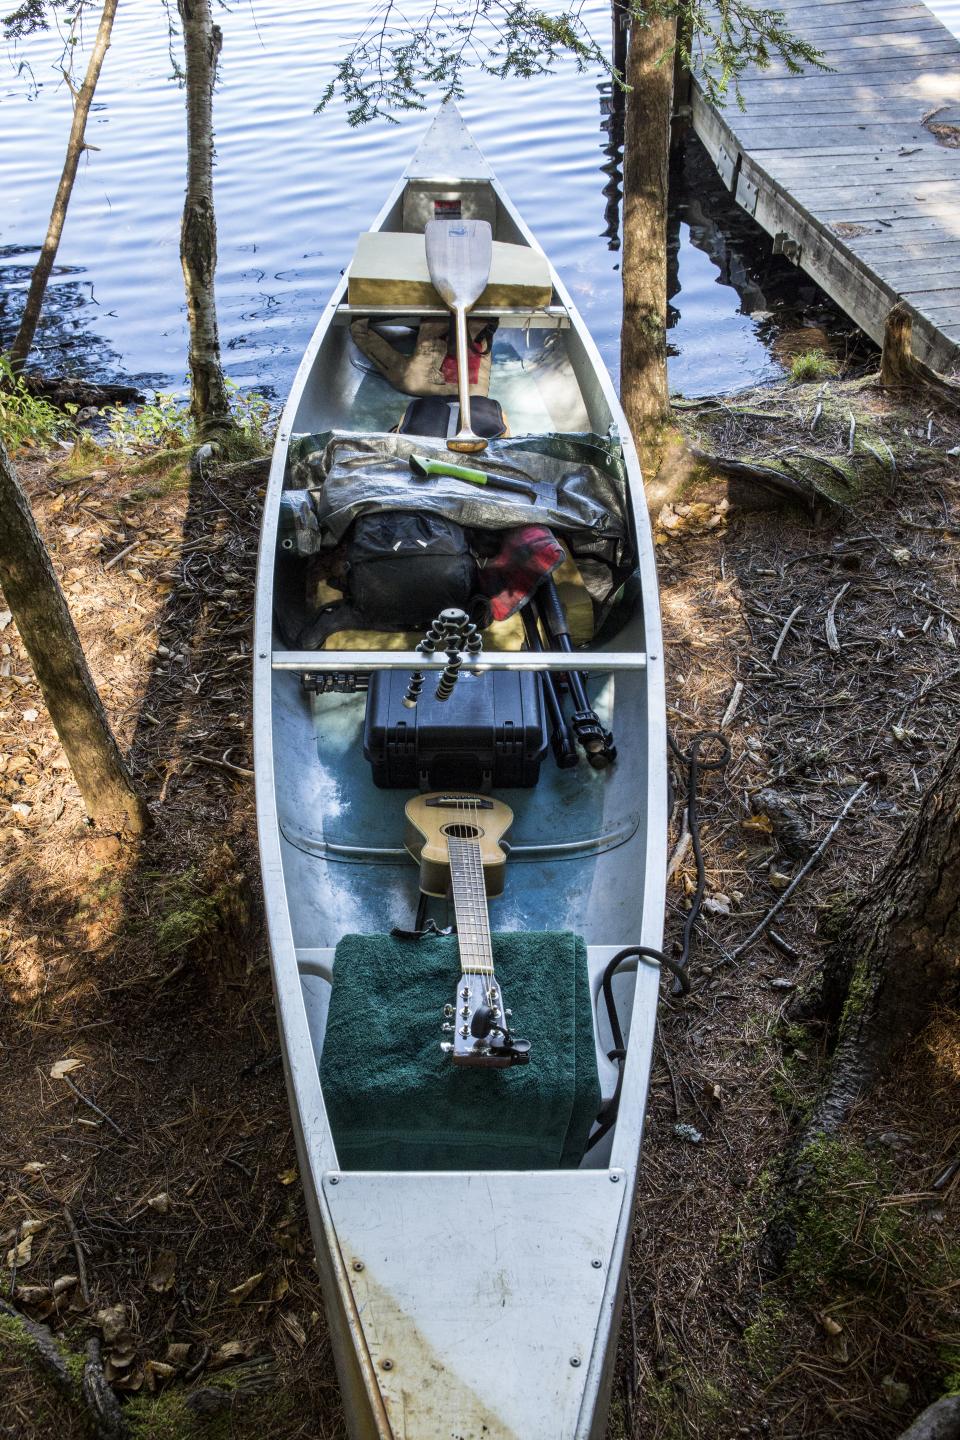 Canoe packed and ready for a camping adventure.